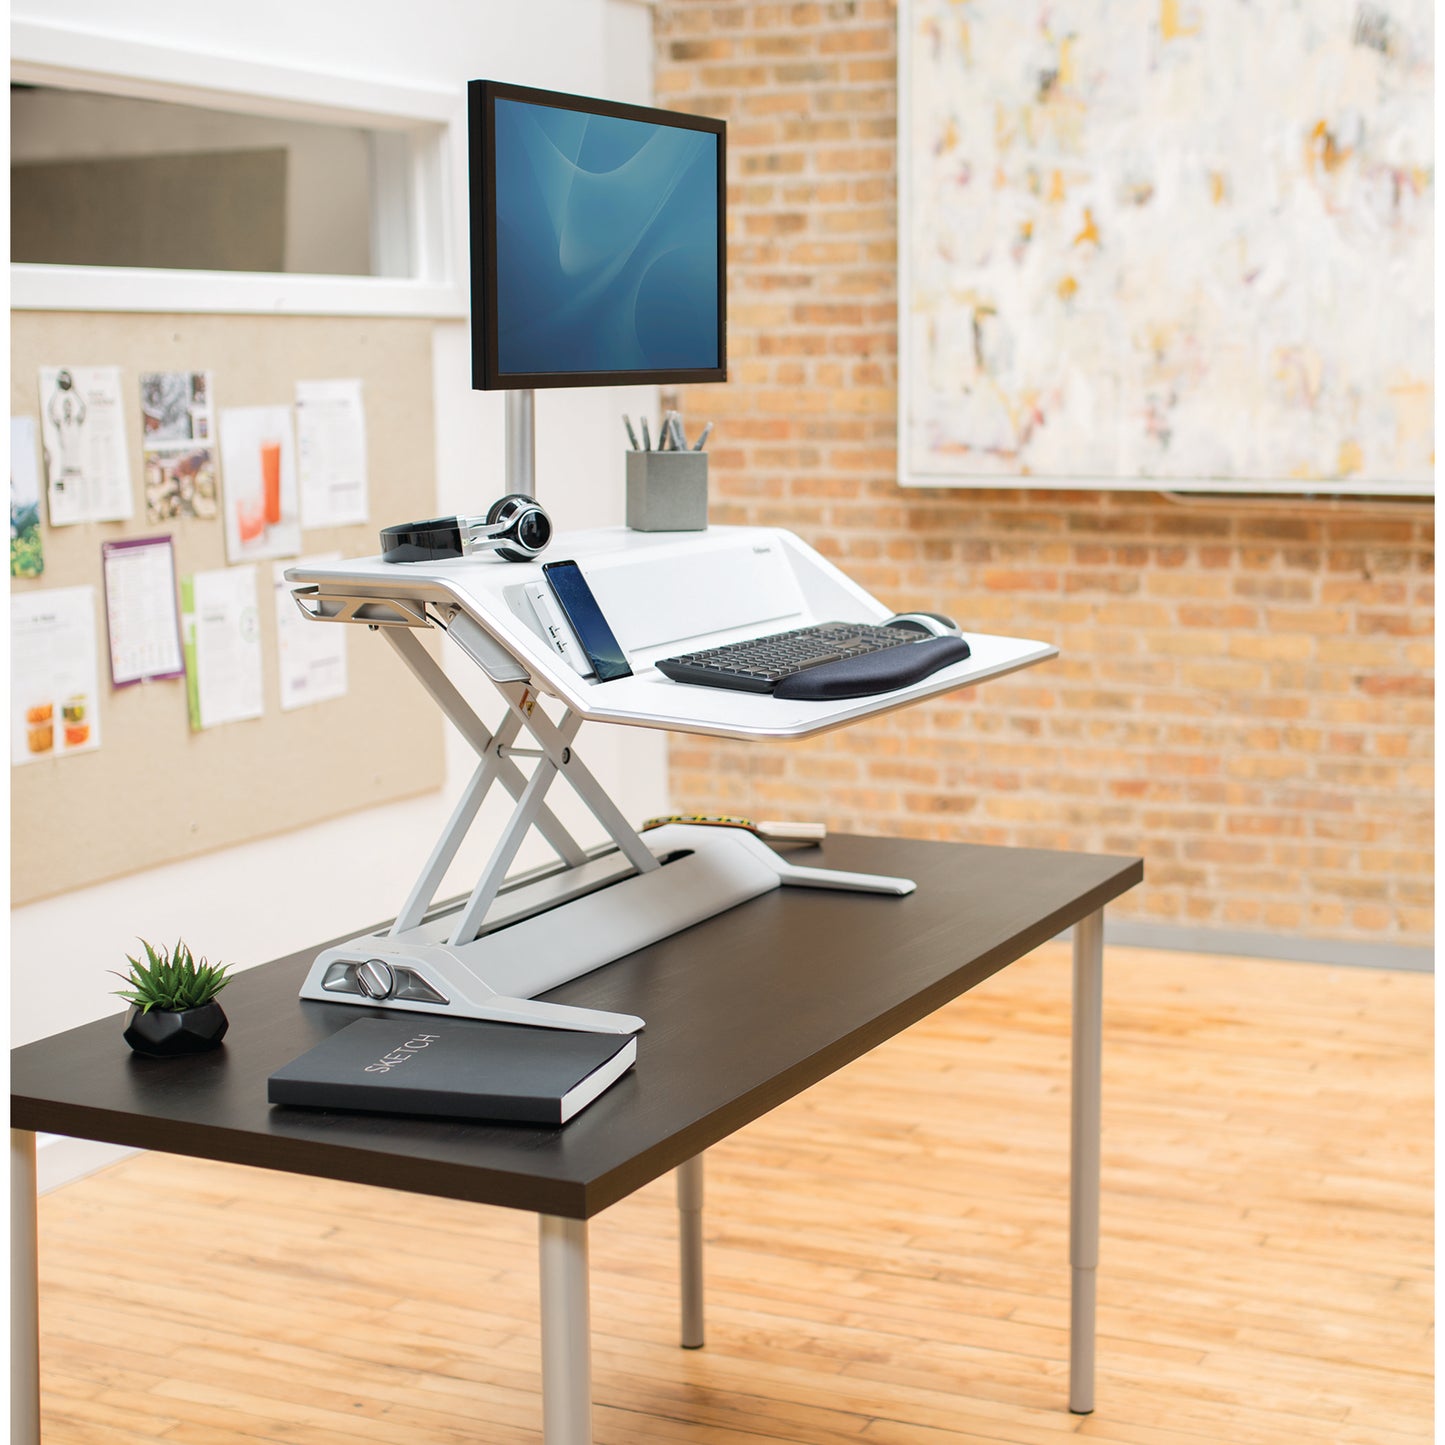 BUY FELLOWES LOTUS DX sit stand workstation FREE SHIPPING 8082201 white single monitor arm